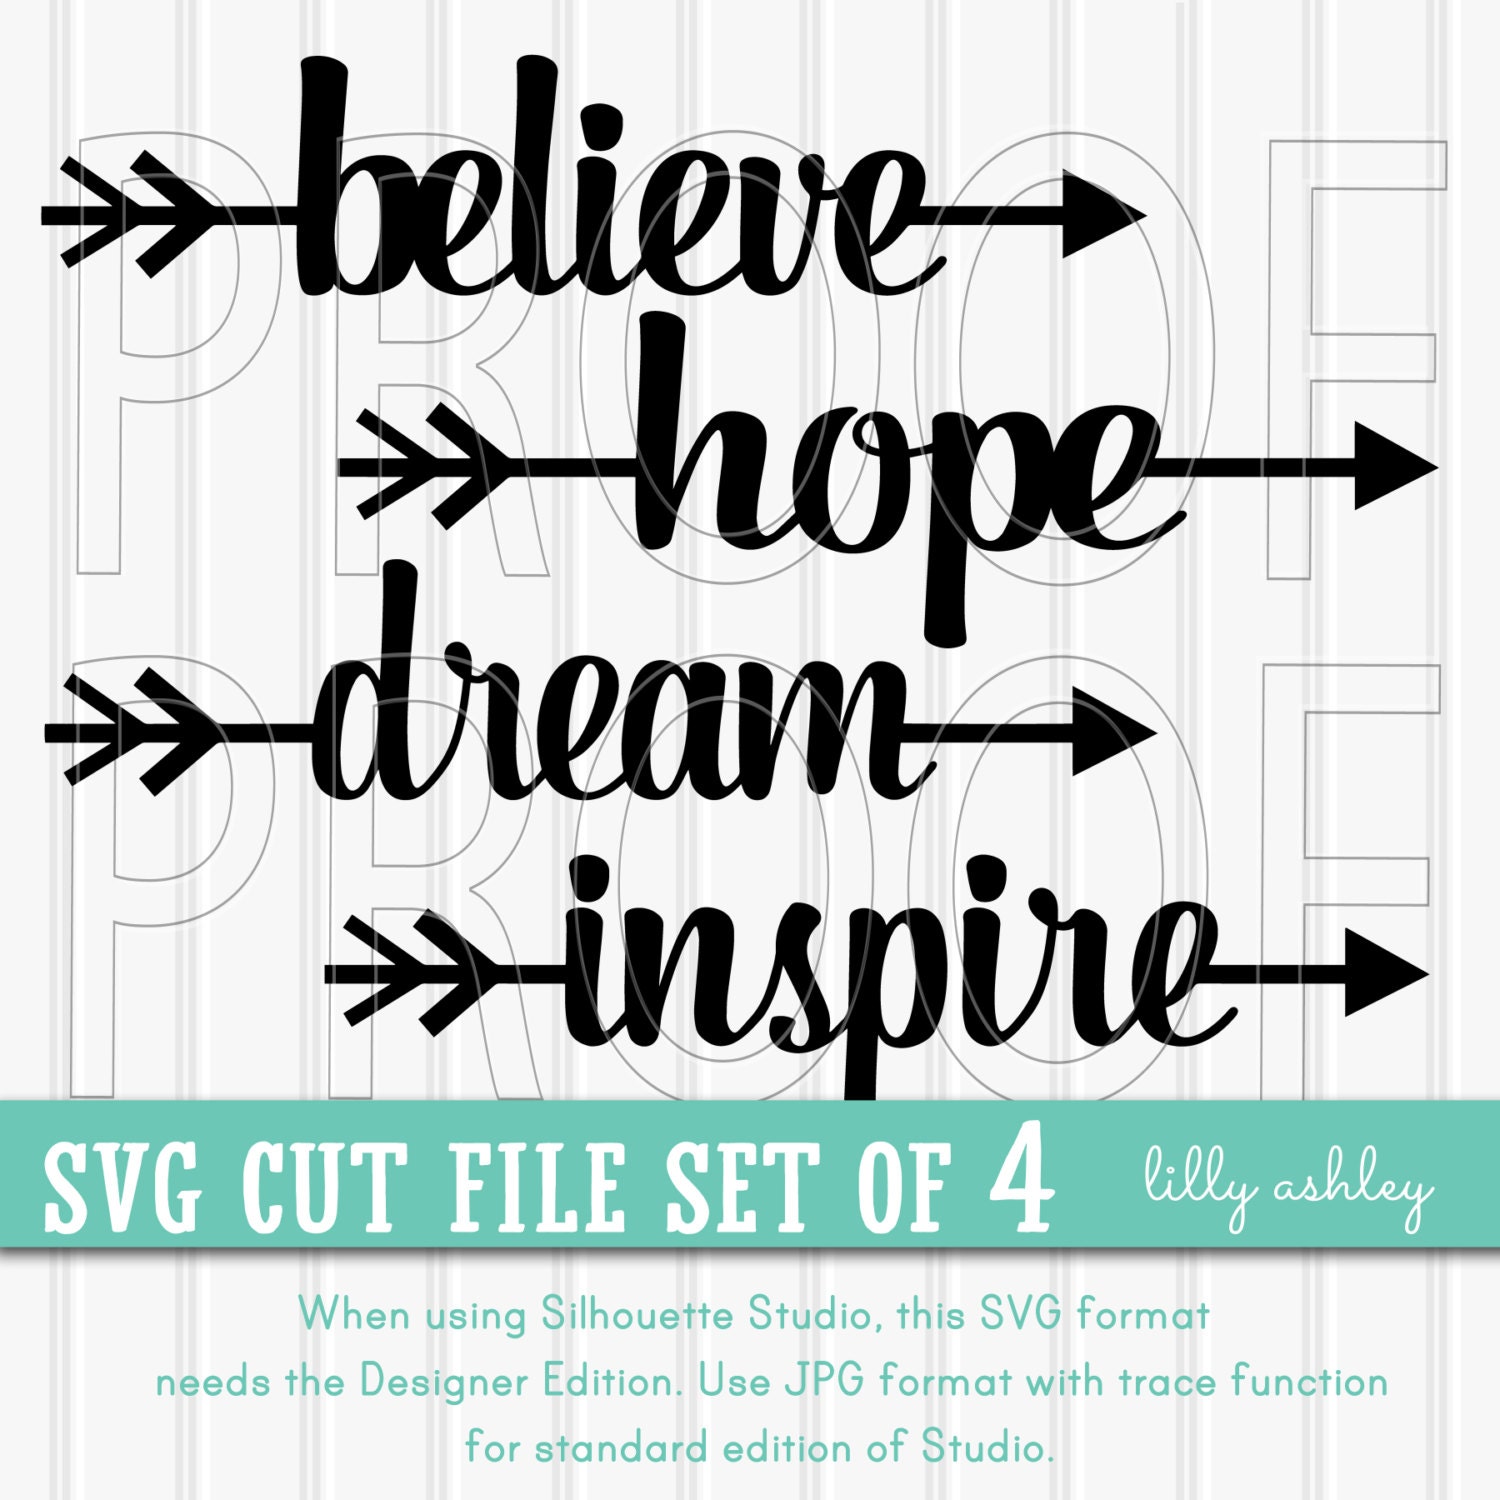 Download SVG Files set of 4 cut filesCommercial use ok Includes PNG